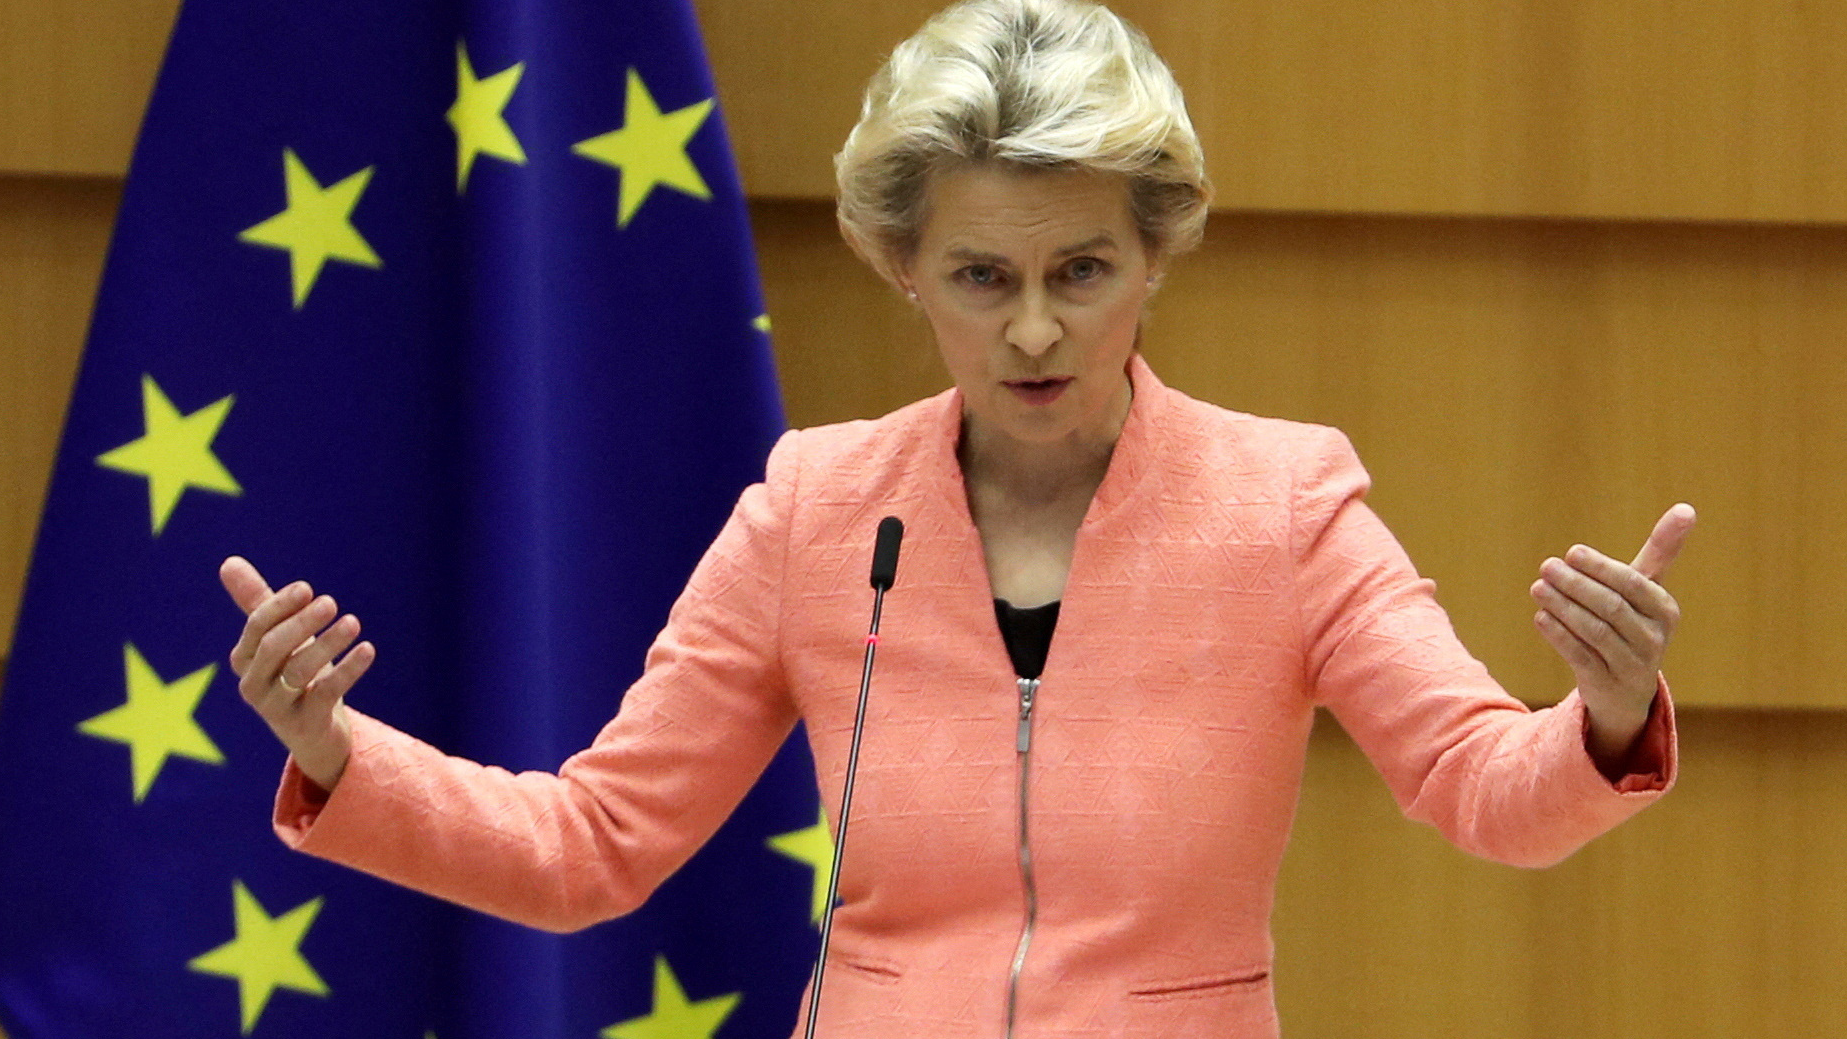 EU leaders have agreed to nominate Ursula von der Leyen for a second five-year term as president of the European Commission. /Yves Herman/Reuters